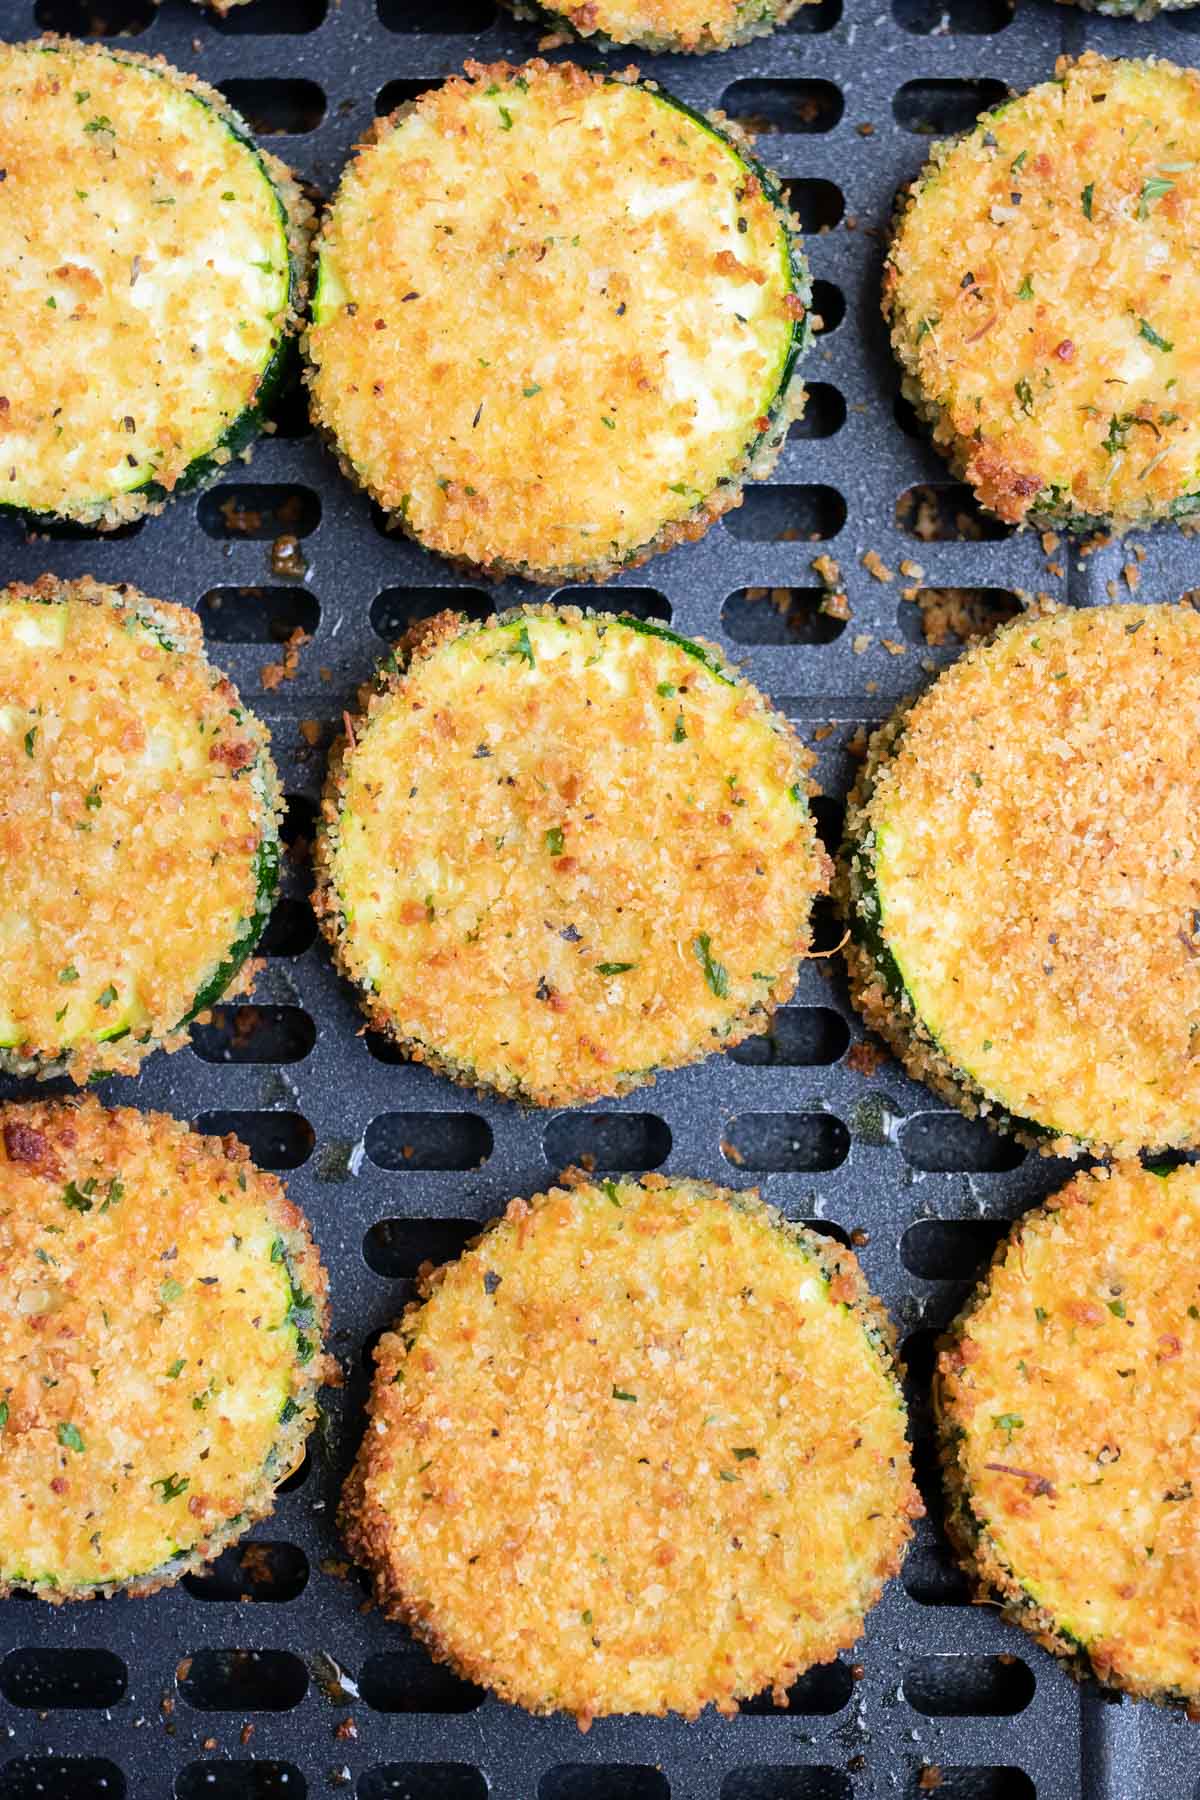 Crispy zucchini chips are shown in the air fryer.